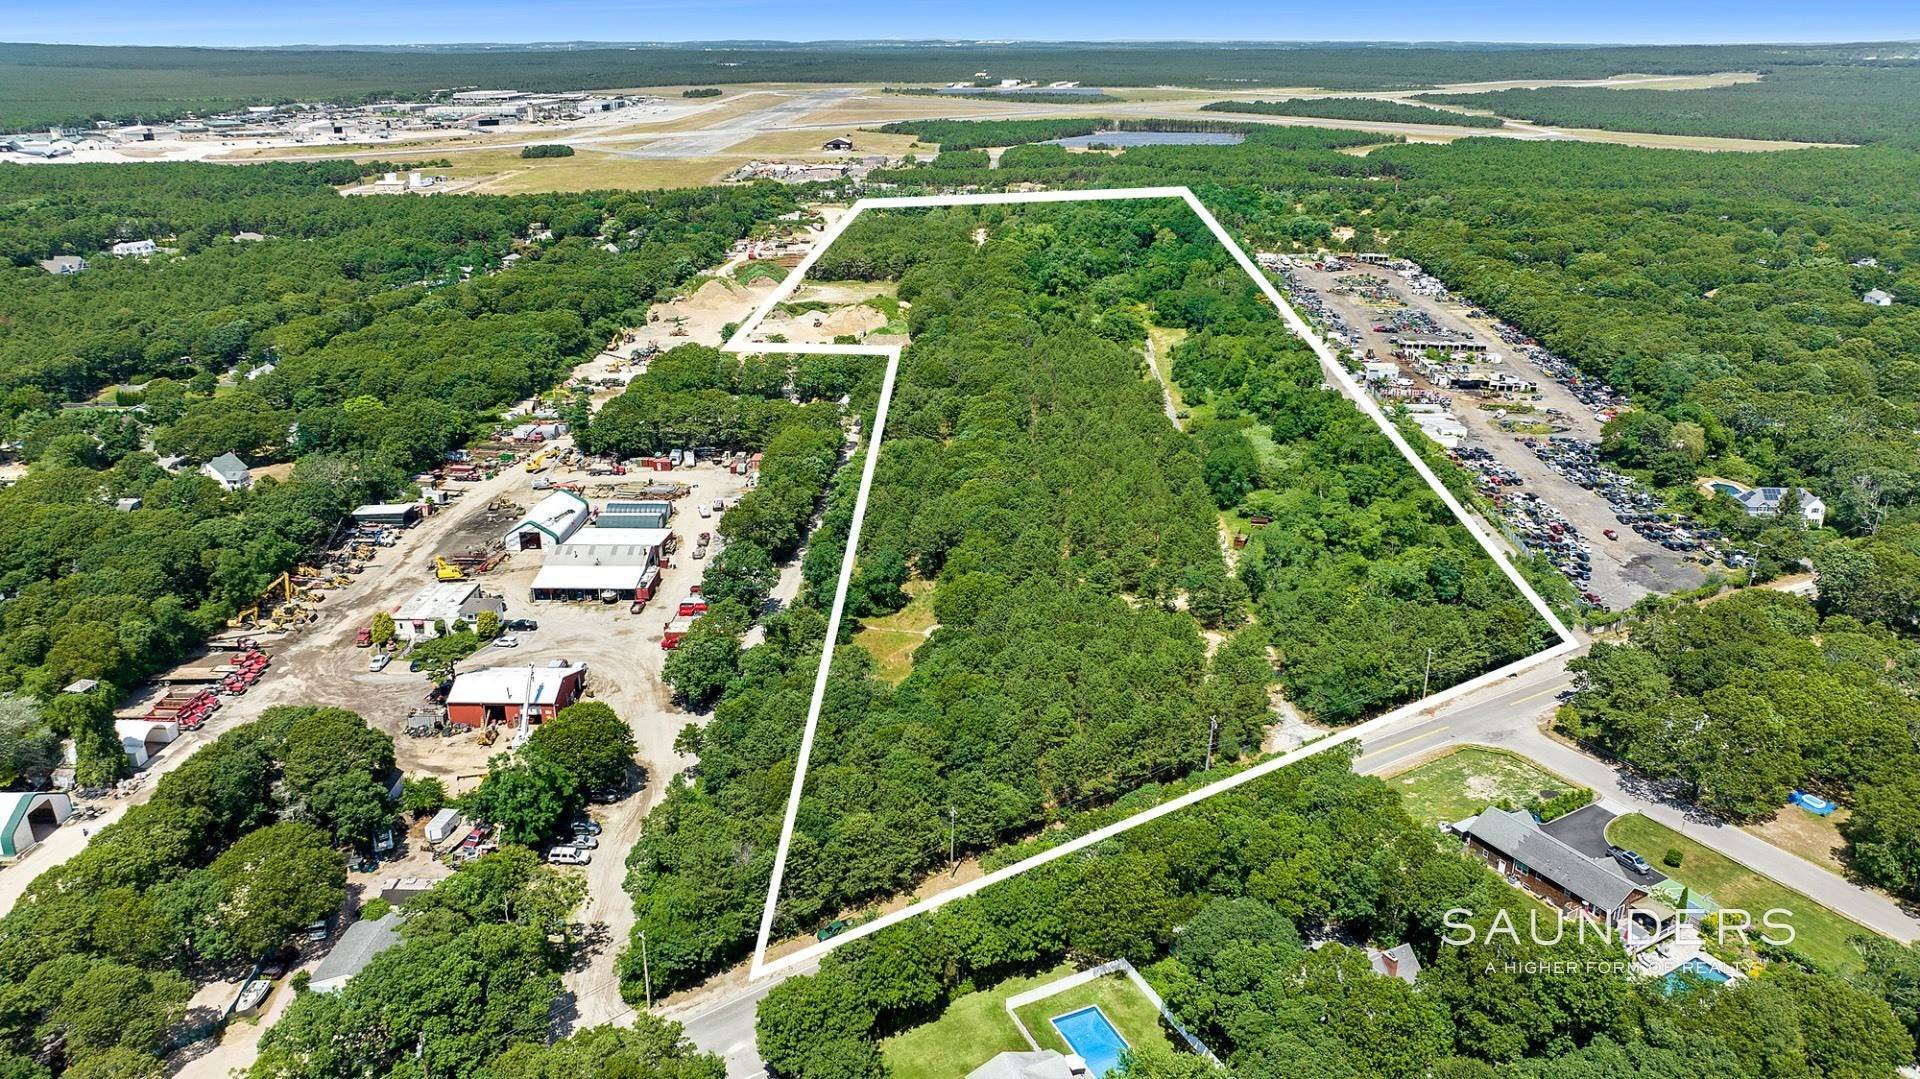 Land for Sale at Development Opportunity Quiogue Westhampton Beach 72 & 82 & 86 South Country Road, Quiogue, NY 11978